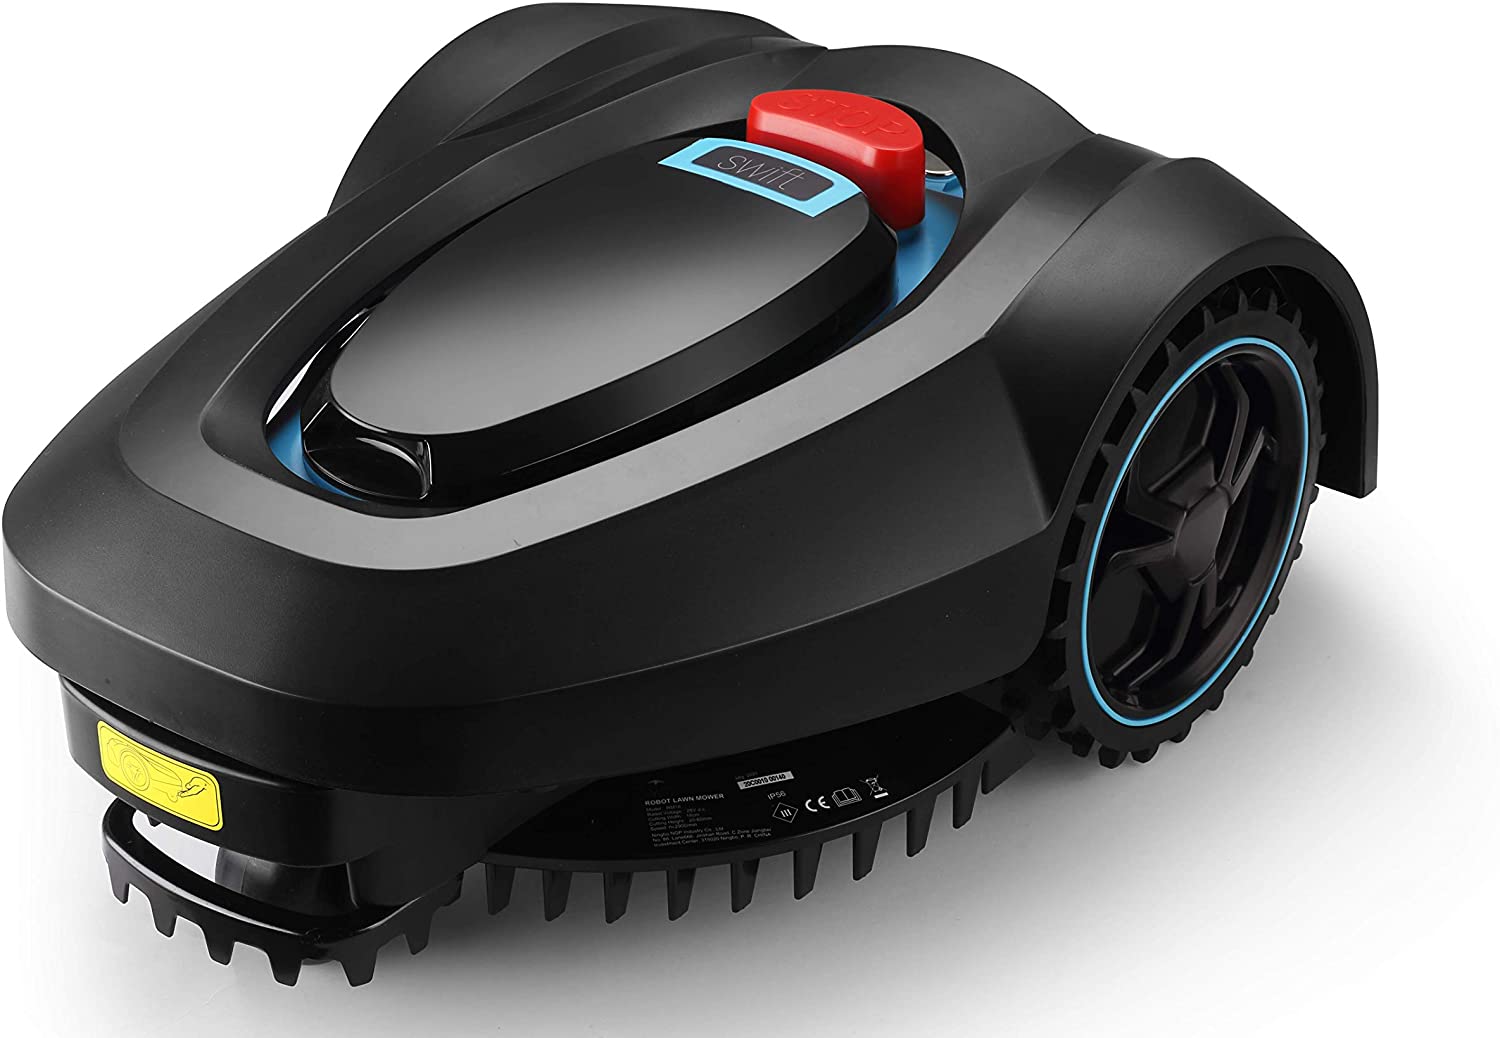 28V Robotic Lawnmower Auto Charging Self-Propelled